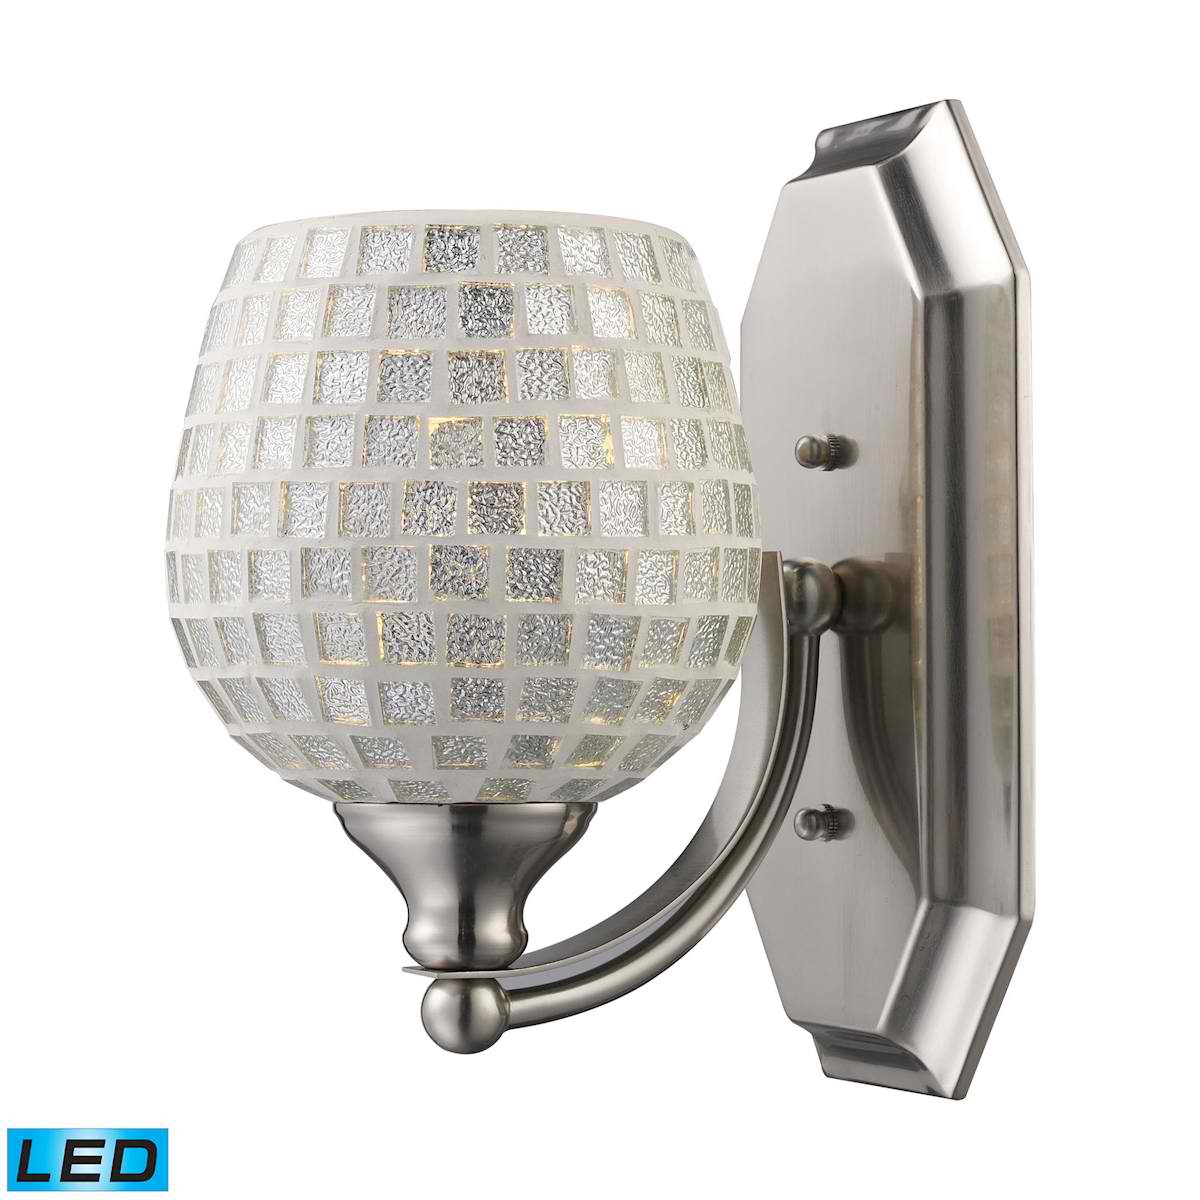 1 Light Vanity in Satin Nickel and Silver Mosaic Glass - LED Offering Up To 800 Lumens (60 Watt Equivalent)